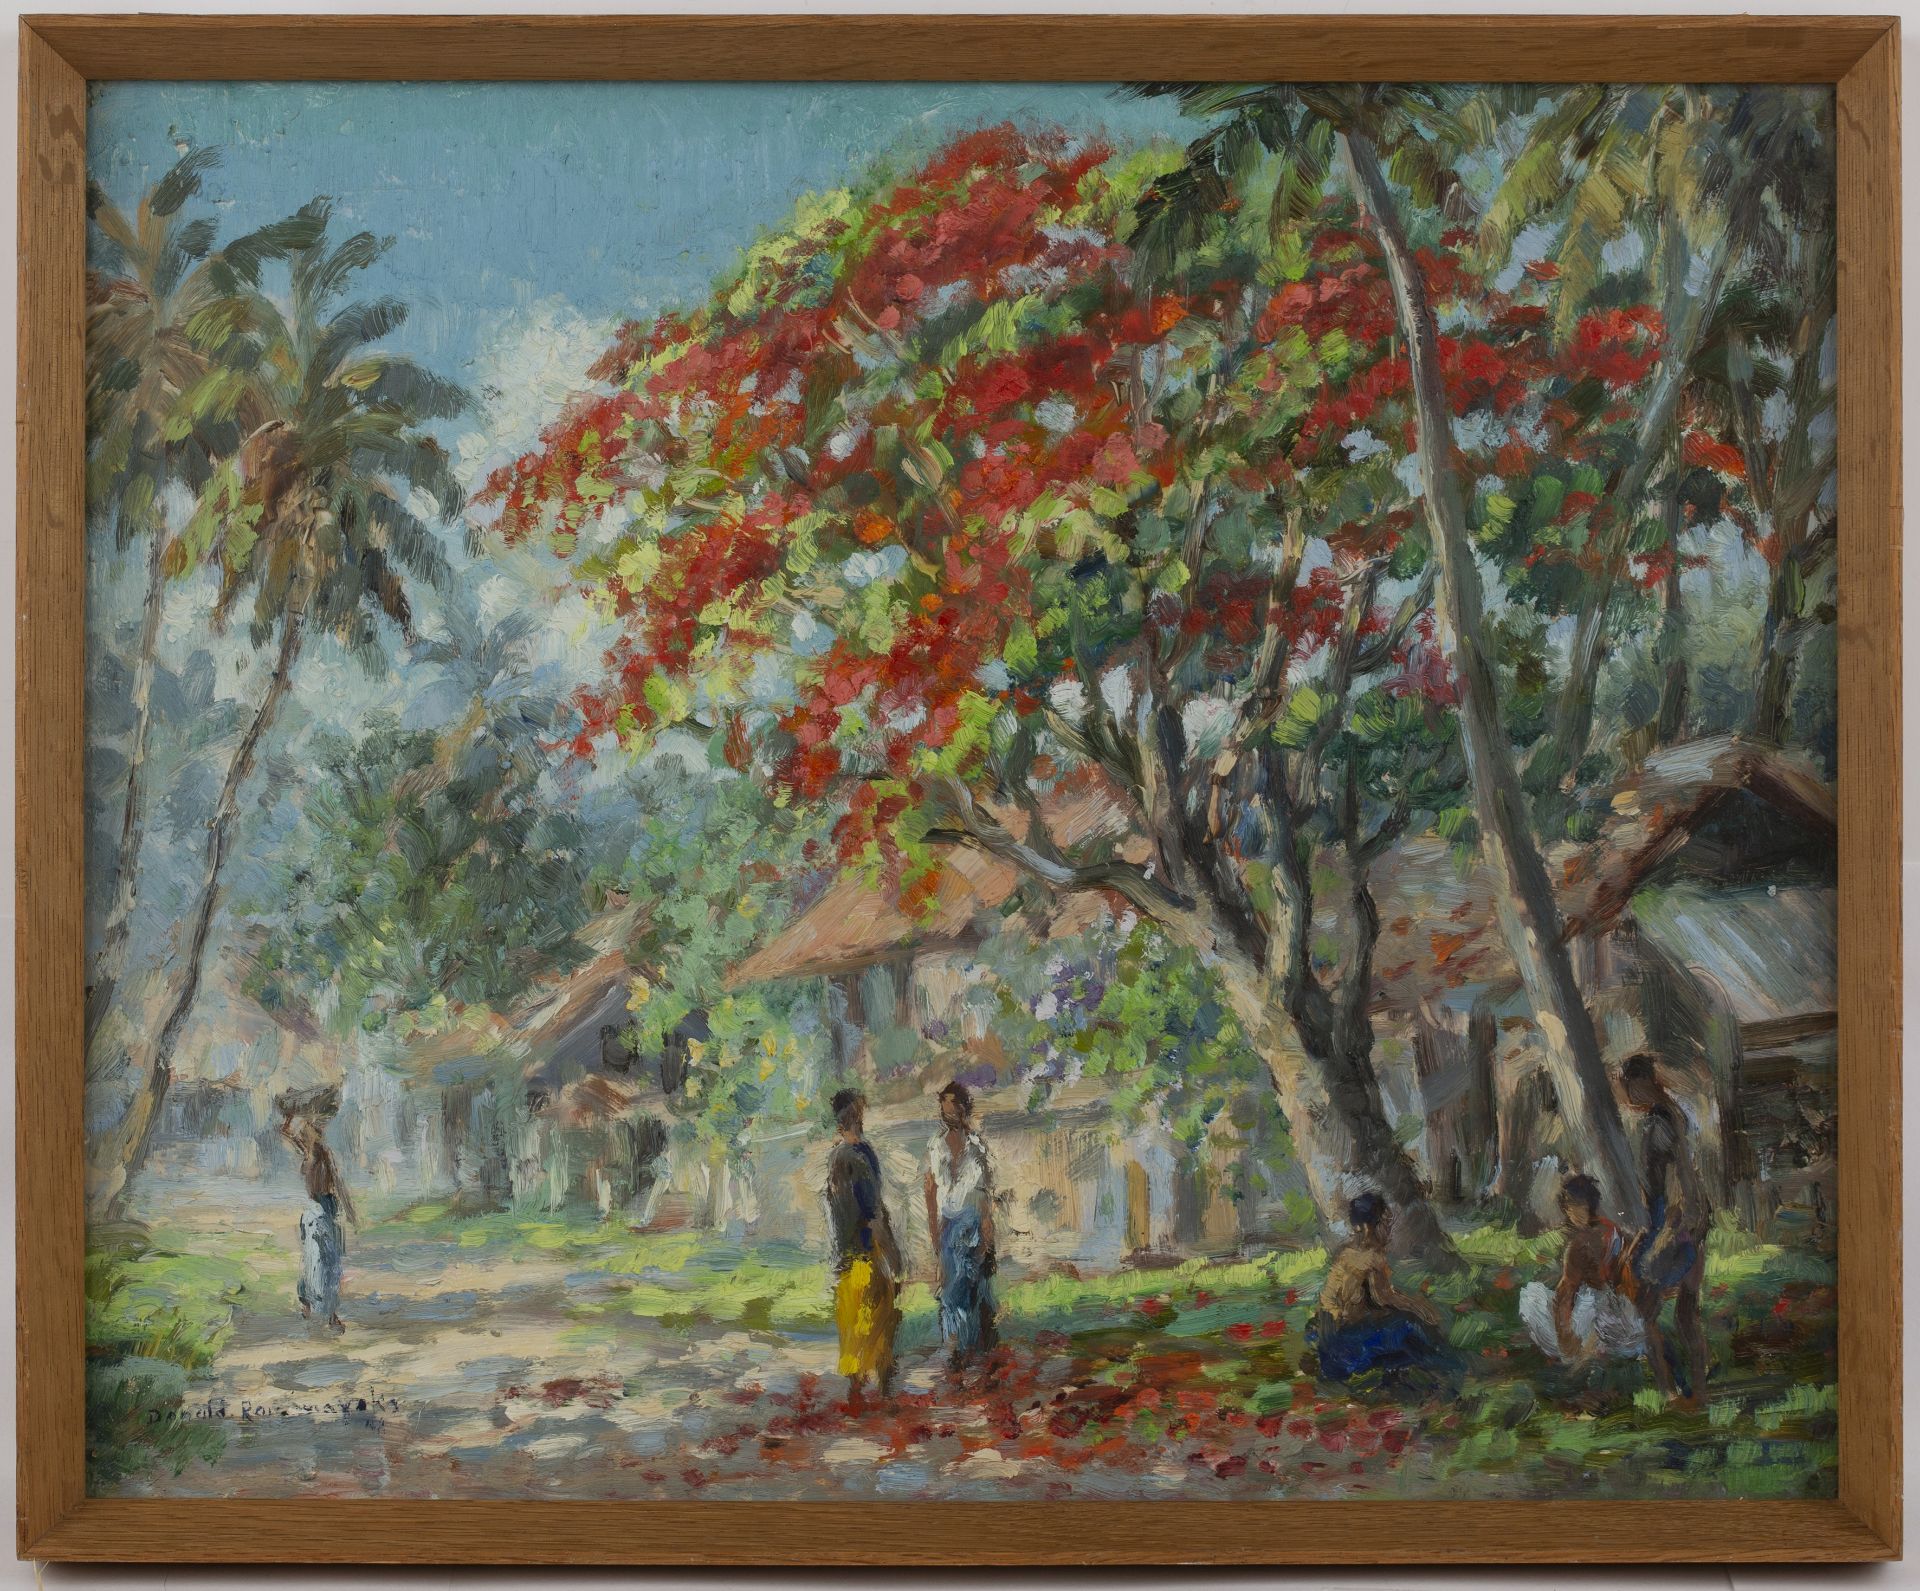 Donald Ramanayake (1920-1993) 'Sri Lankan village scene', oil on panel, signed and dated 1948 - Image 2 of 3